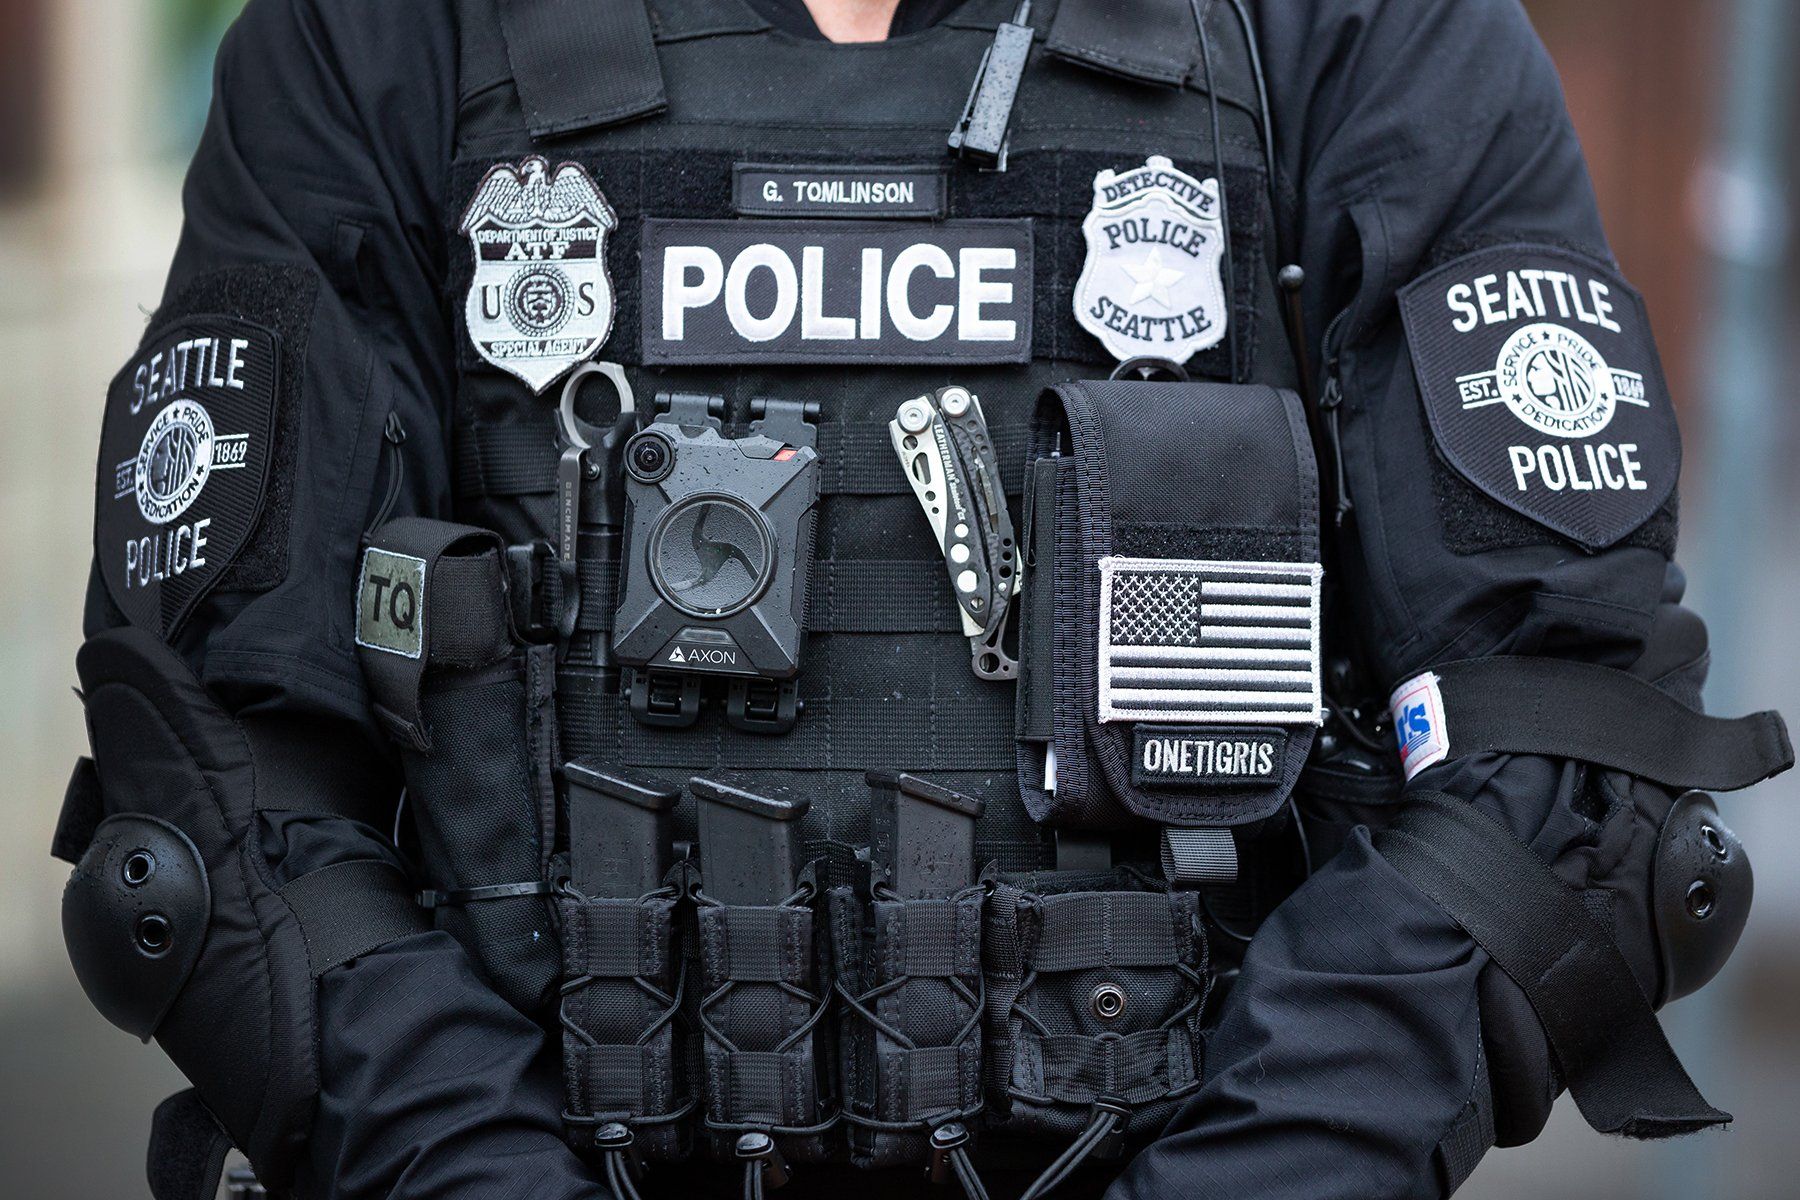 What Police Gear Do Law Enforcement Officers Need?